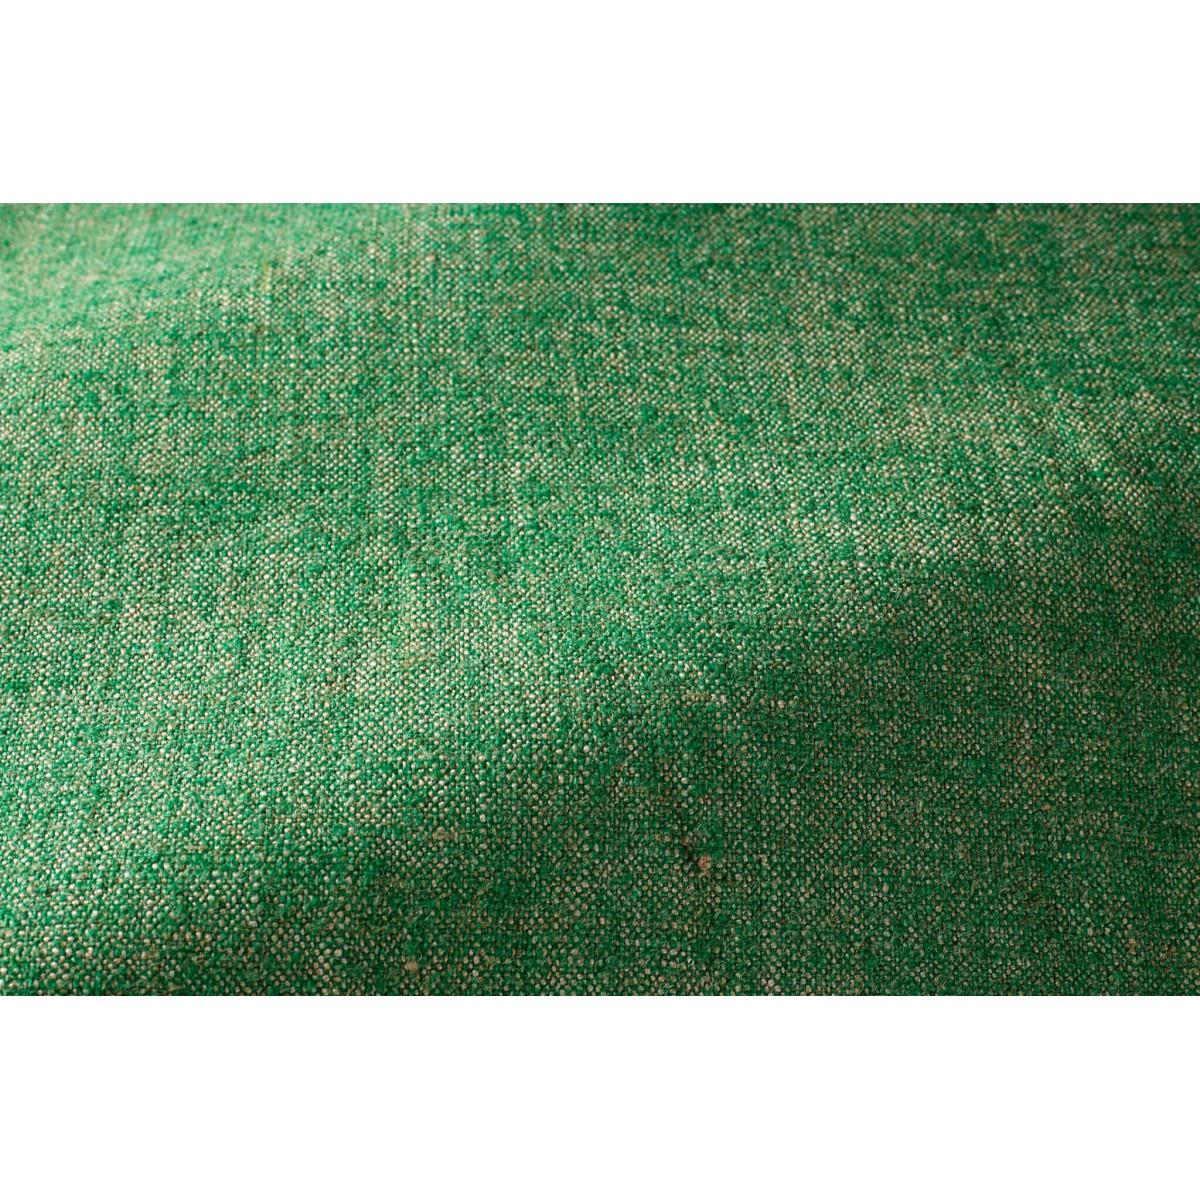 Popus Editions Giovanna 2.5 Seater Sofa in Emerald London Linen Fabric.

Giovanna is a sofa with a strong profile. A sober, plush line, with this famous detail that changes everything, so as not to forget its strength of character and this